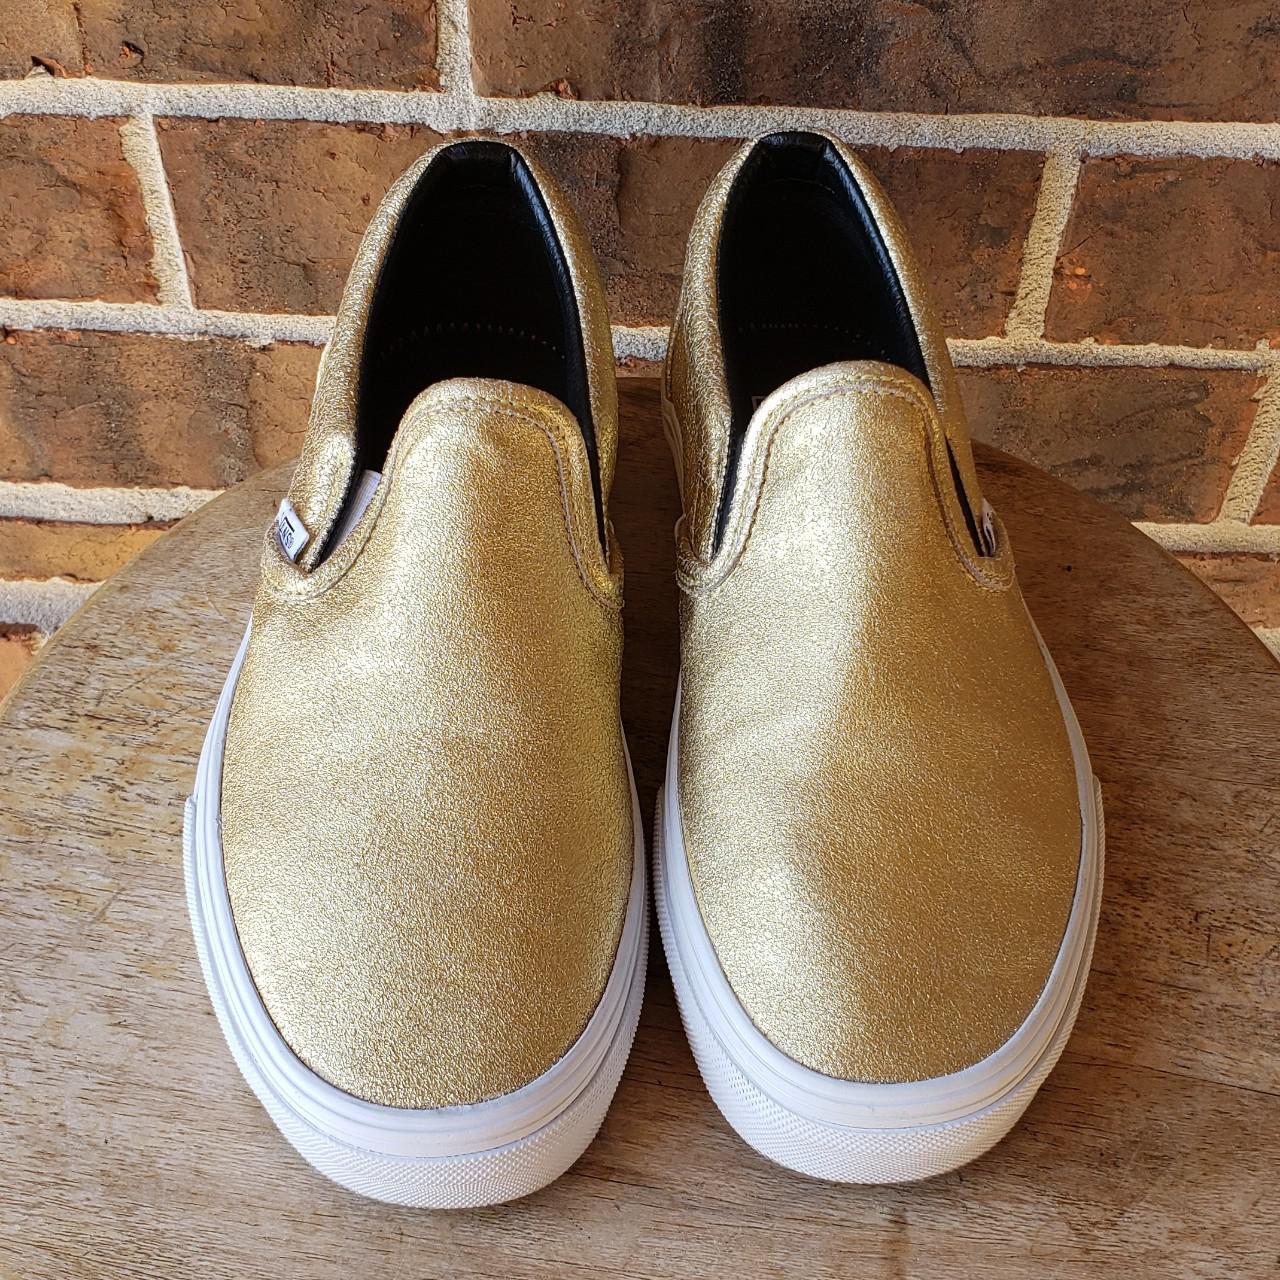 Vans Women's White and Gold Trainers (2)